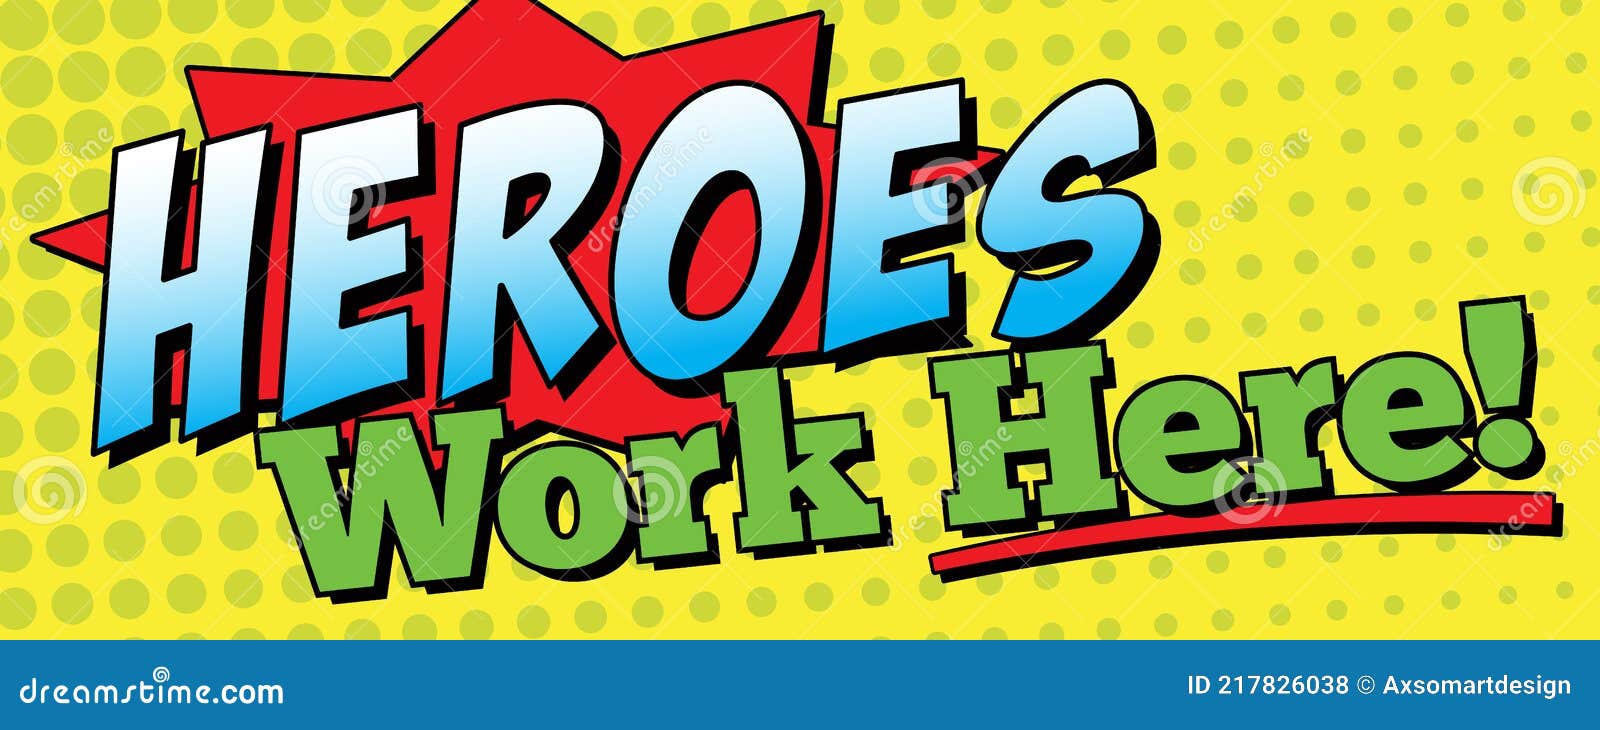 heroes work here banner | 2` x 5` banner template for hospitals, first responders & essential business | employee appreciation